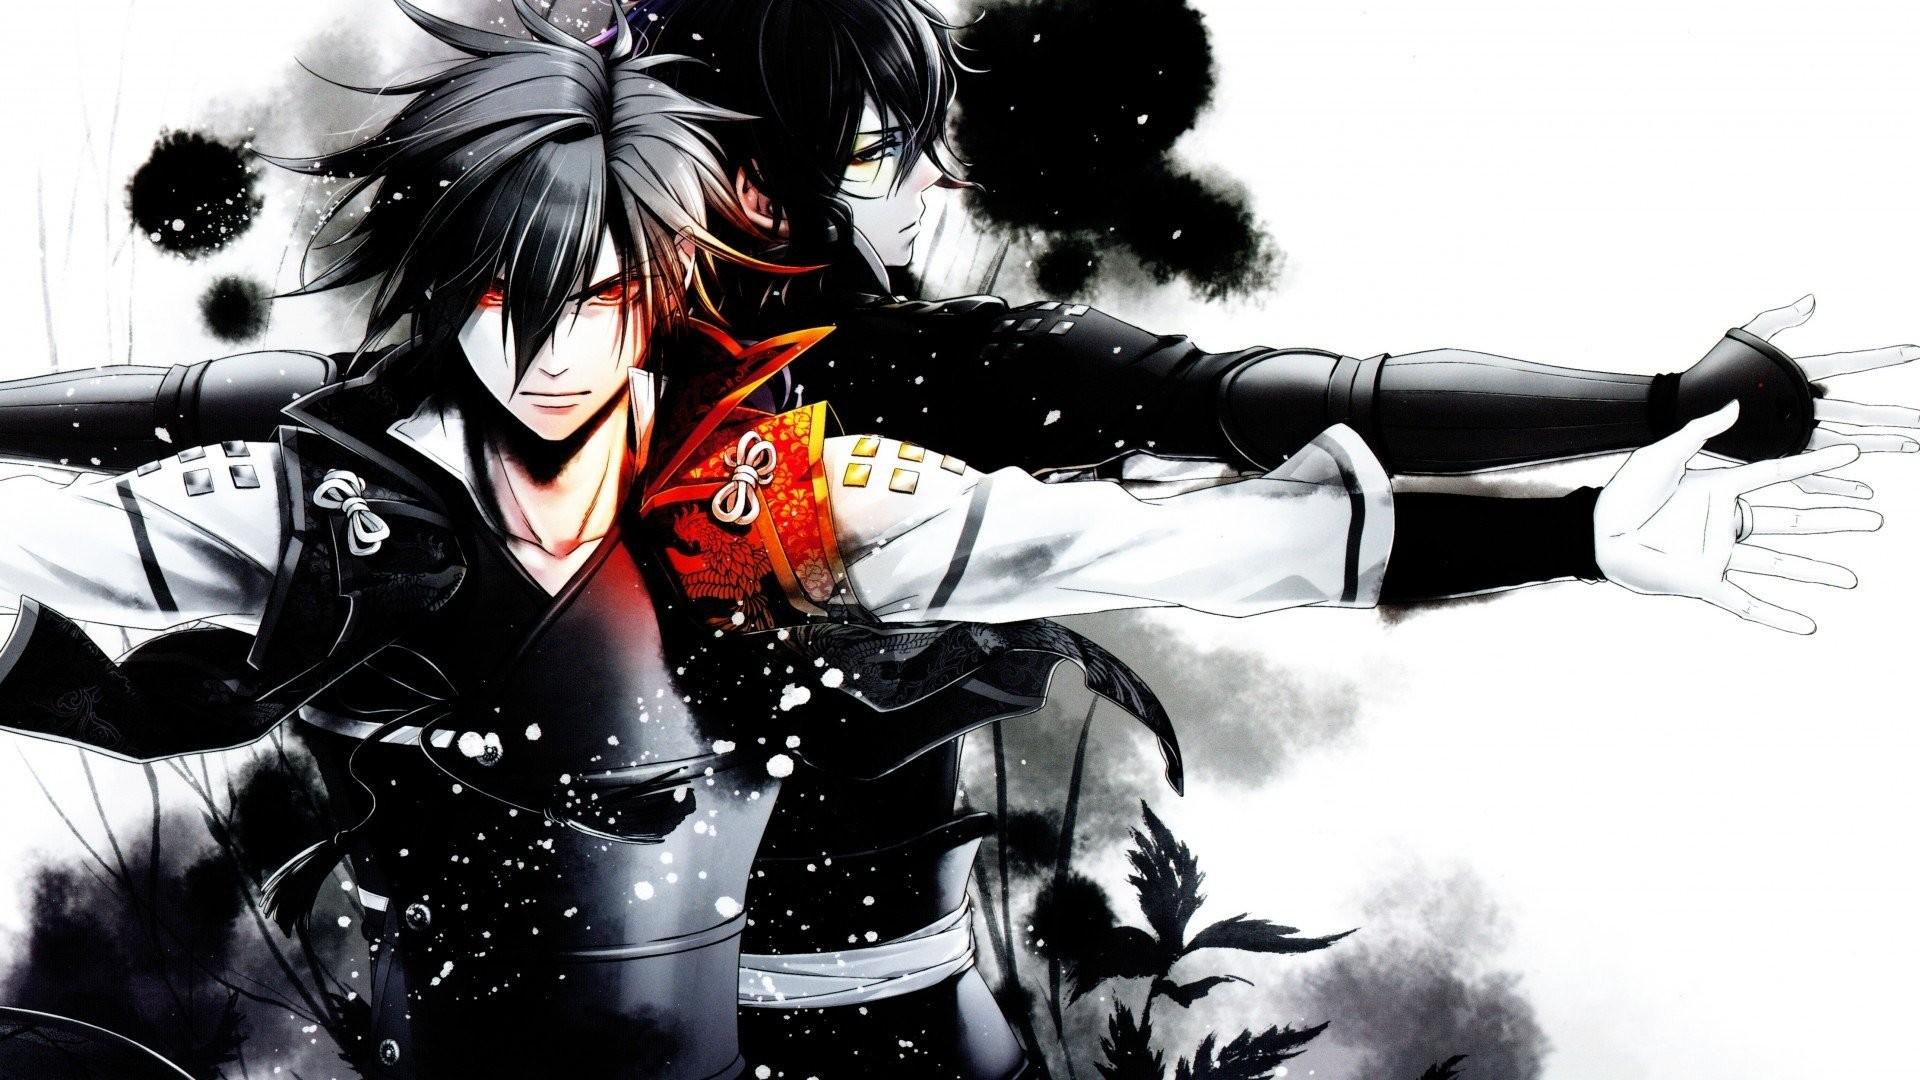 Male Badass Anime Hd Wallpapers - Wallpaper Cave